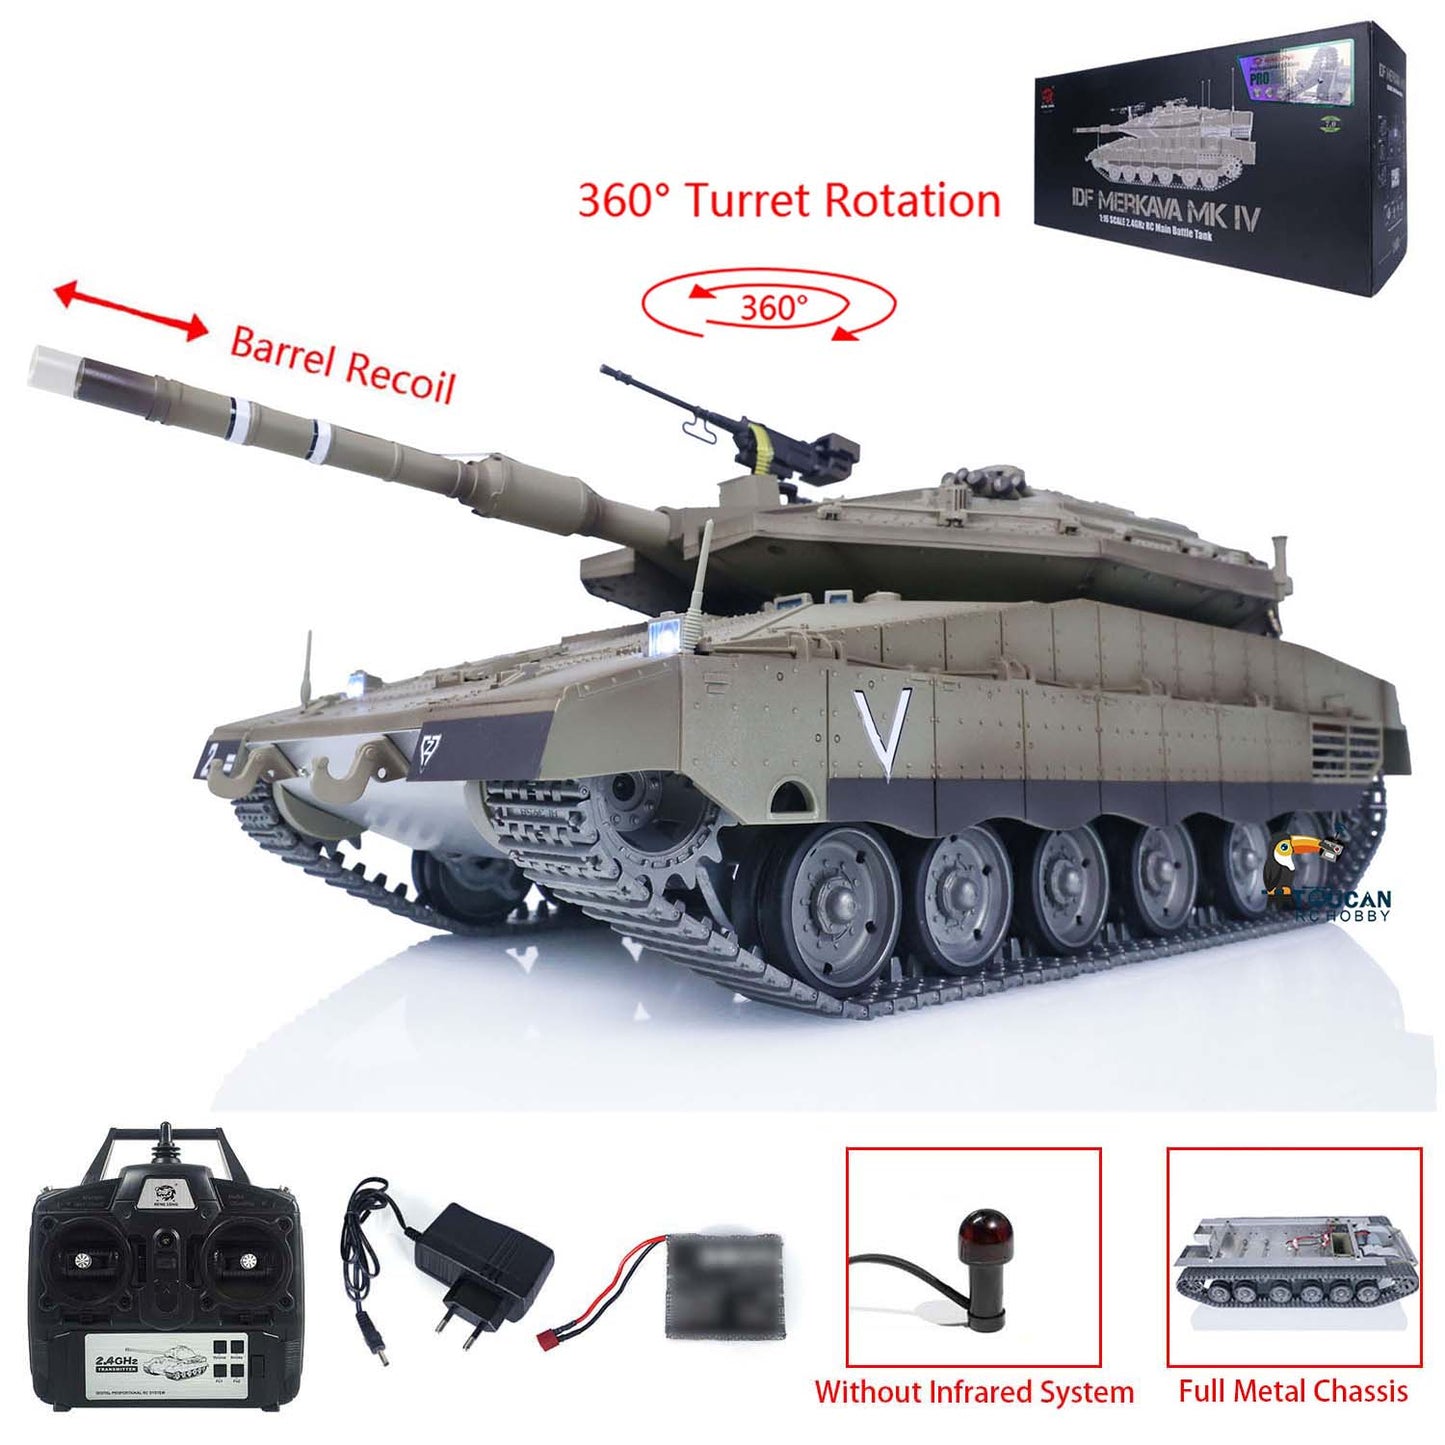 Free shipping IDF Merkava MK IV Heng Long 1/16 2.4Ghz TK16 Radio Control Military RC Battle Tank Full Metal Chassis 3958 Customized Features 360° Turret Teshulianjie